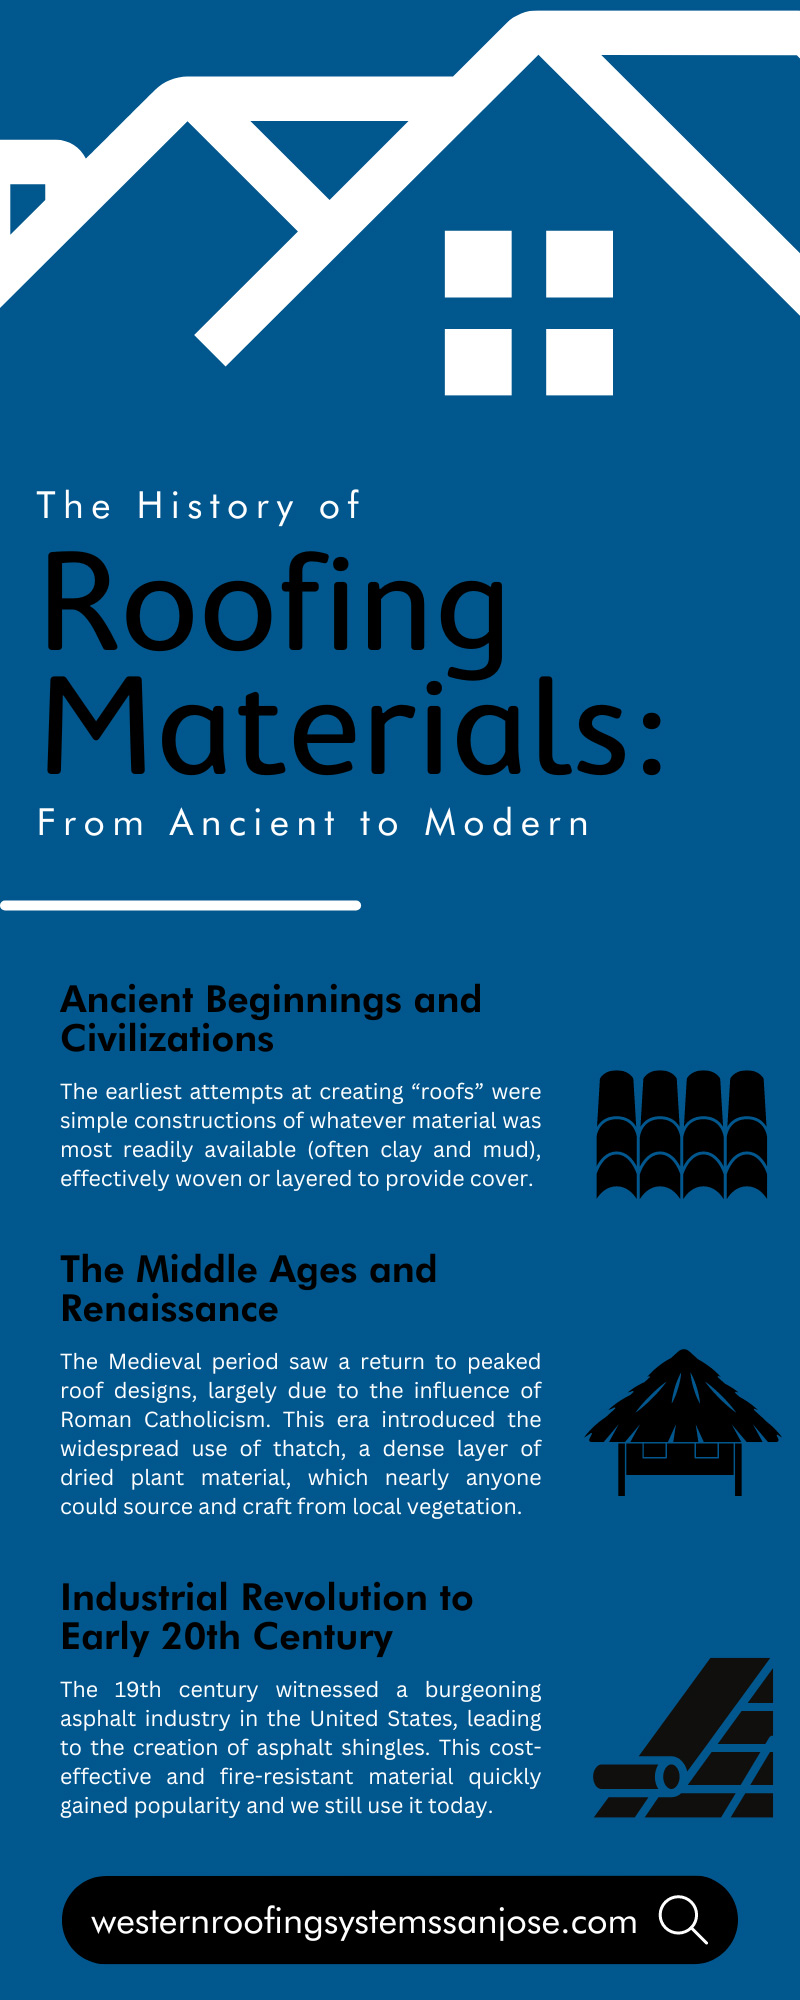 The History of Roofing Materials: From Ancient to Modern